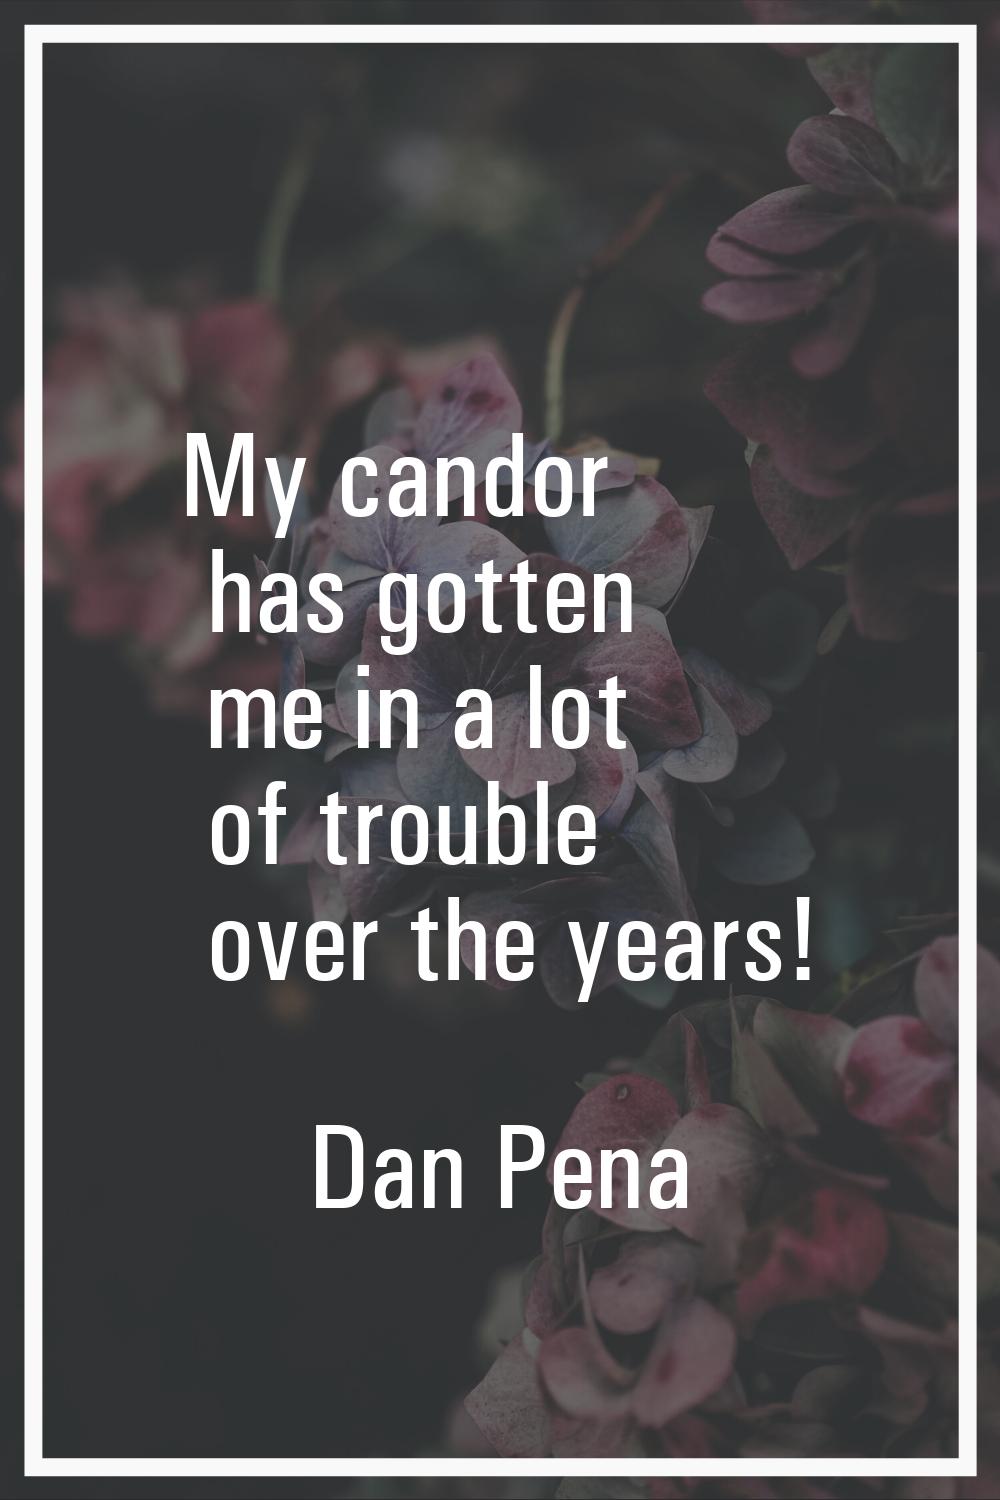 My candor has gotten me in a lot of trouble over the years!